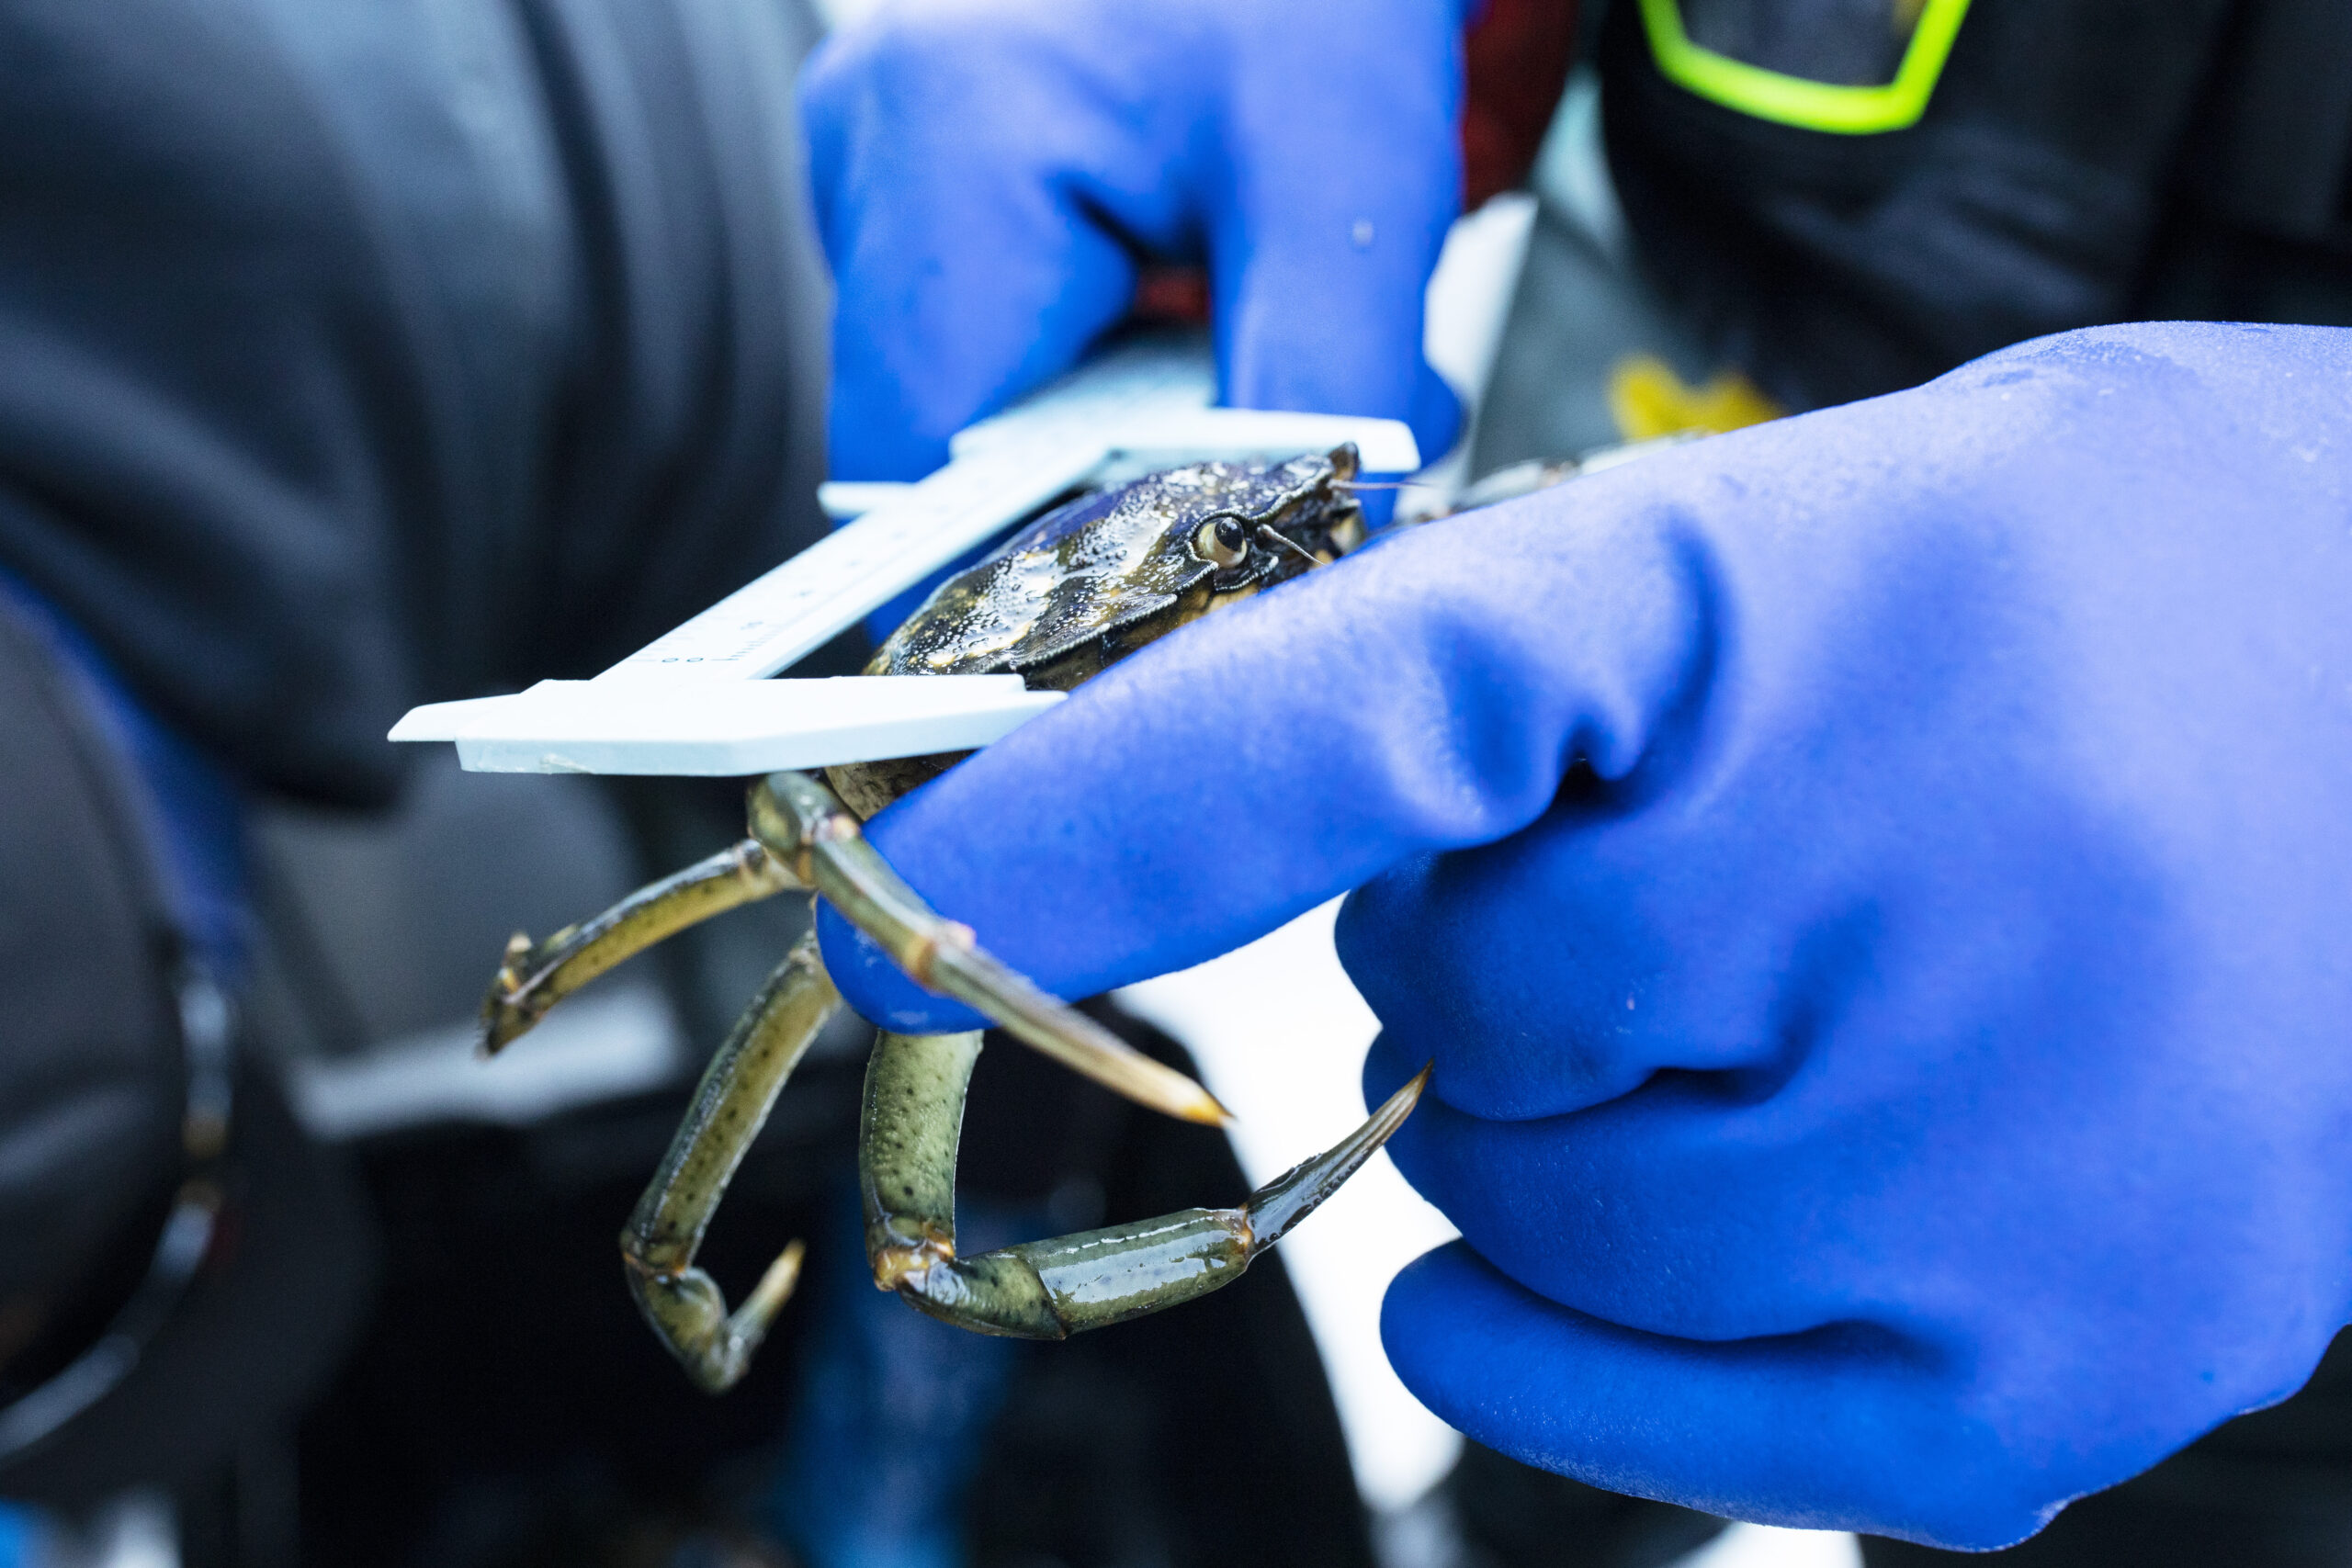 A close up of a crab as Coastal Restoration Society technician Joe Louie measures its carapace. Louie is wearing blue gloves.